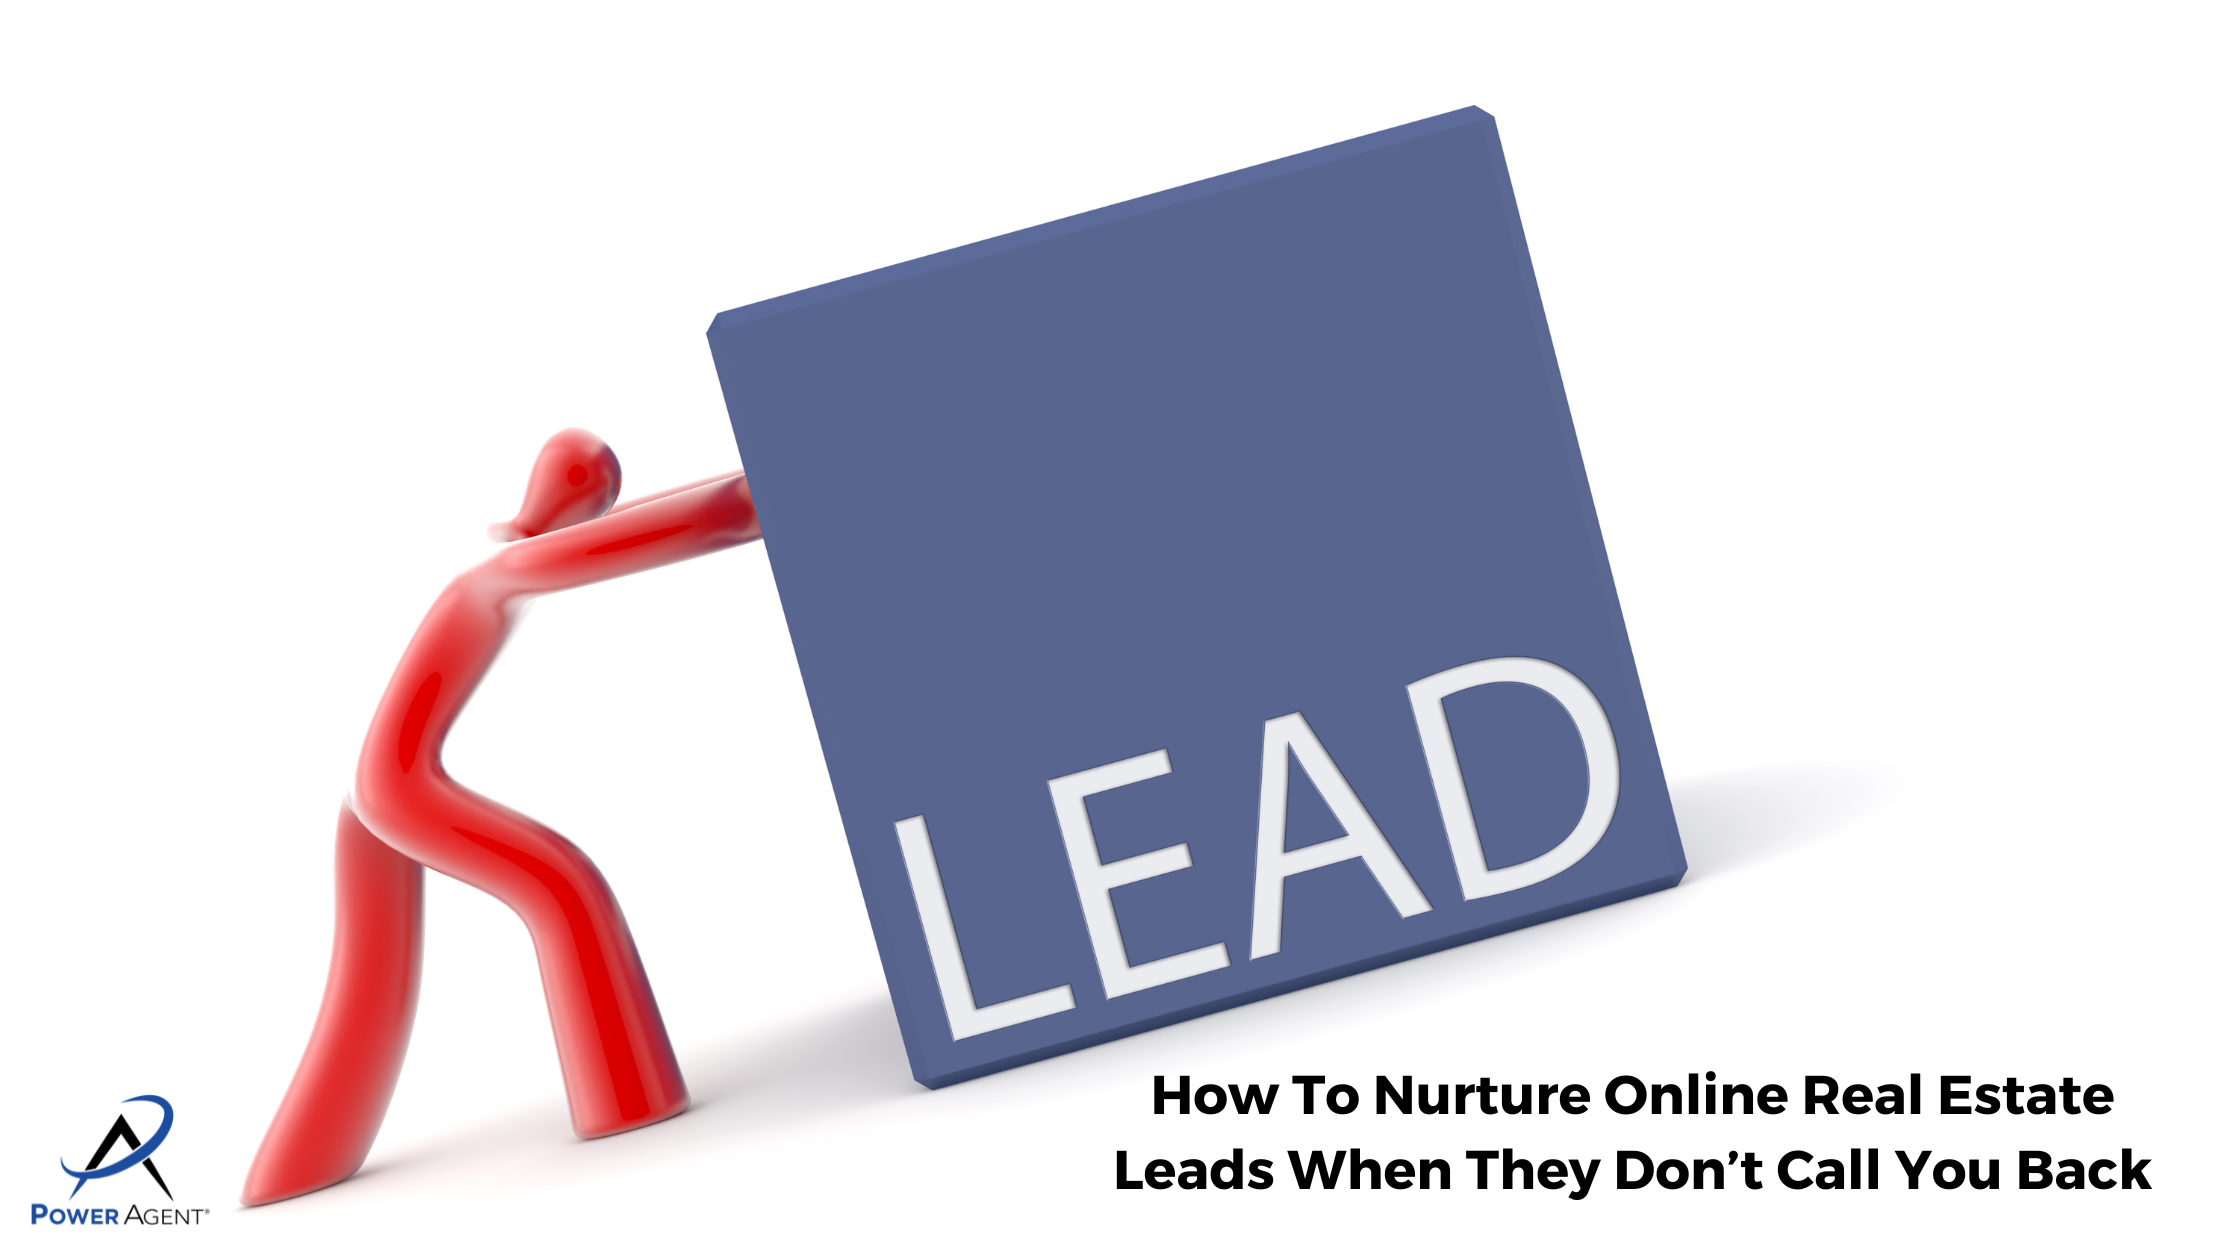 How To Nurture Online Real Estate Leads When They Don’t Call You Back